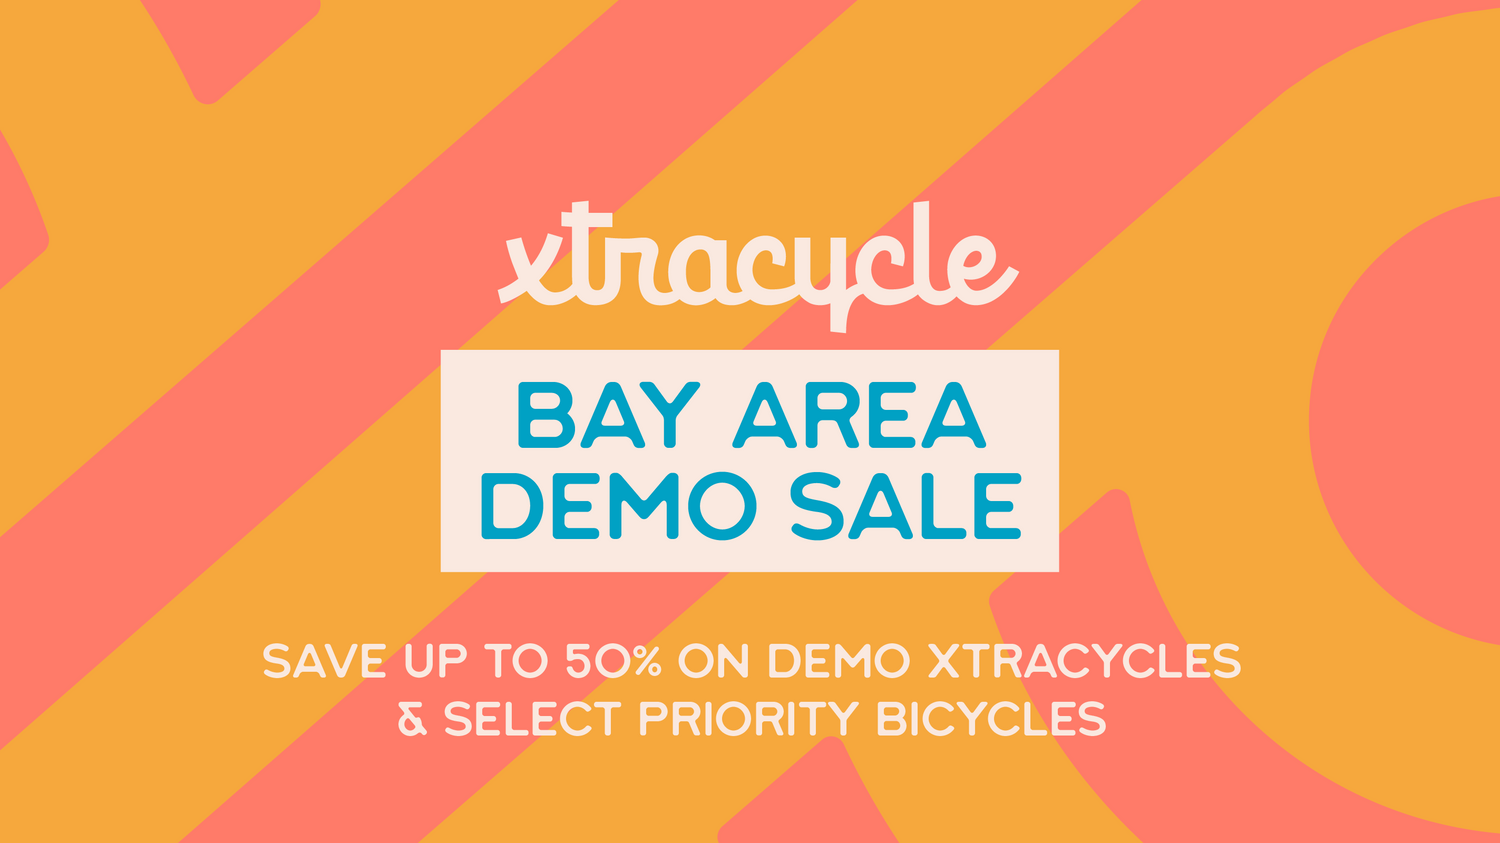 Xtracycle Bay Area Demo Sale. Save up to 50% on Demo Xtracycles & select Priority Bicycles